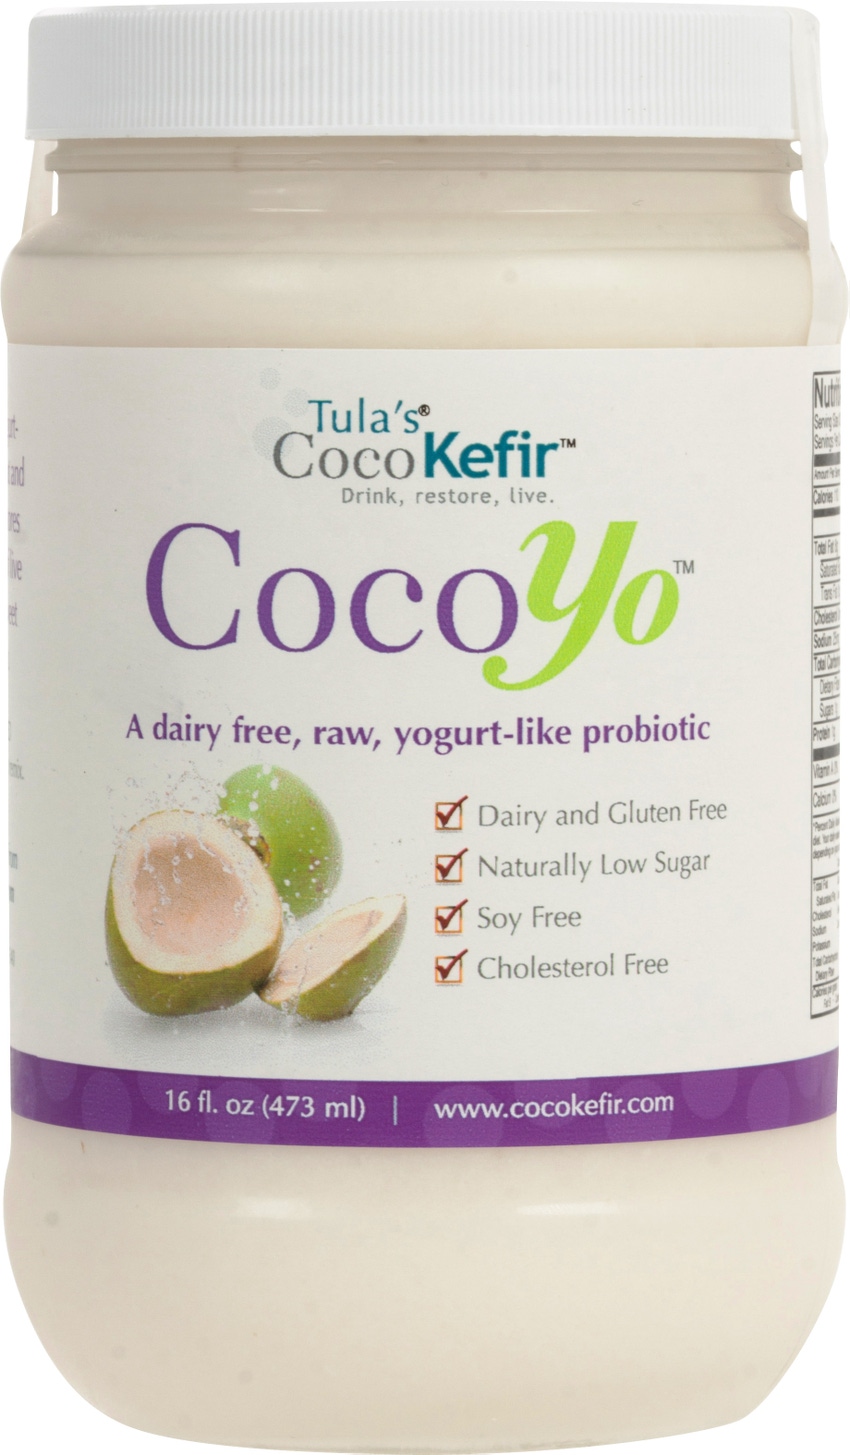 CocoKefir, CocoYo to make Expo West debut